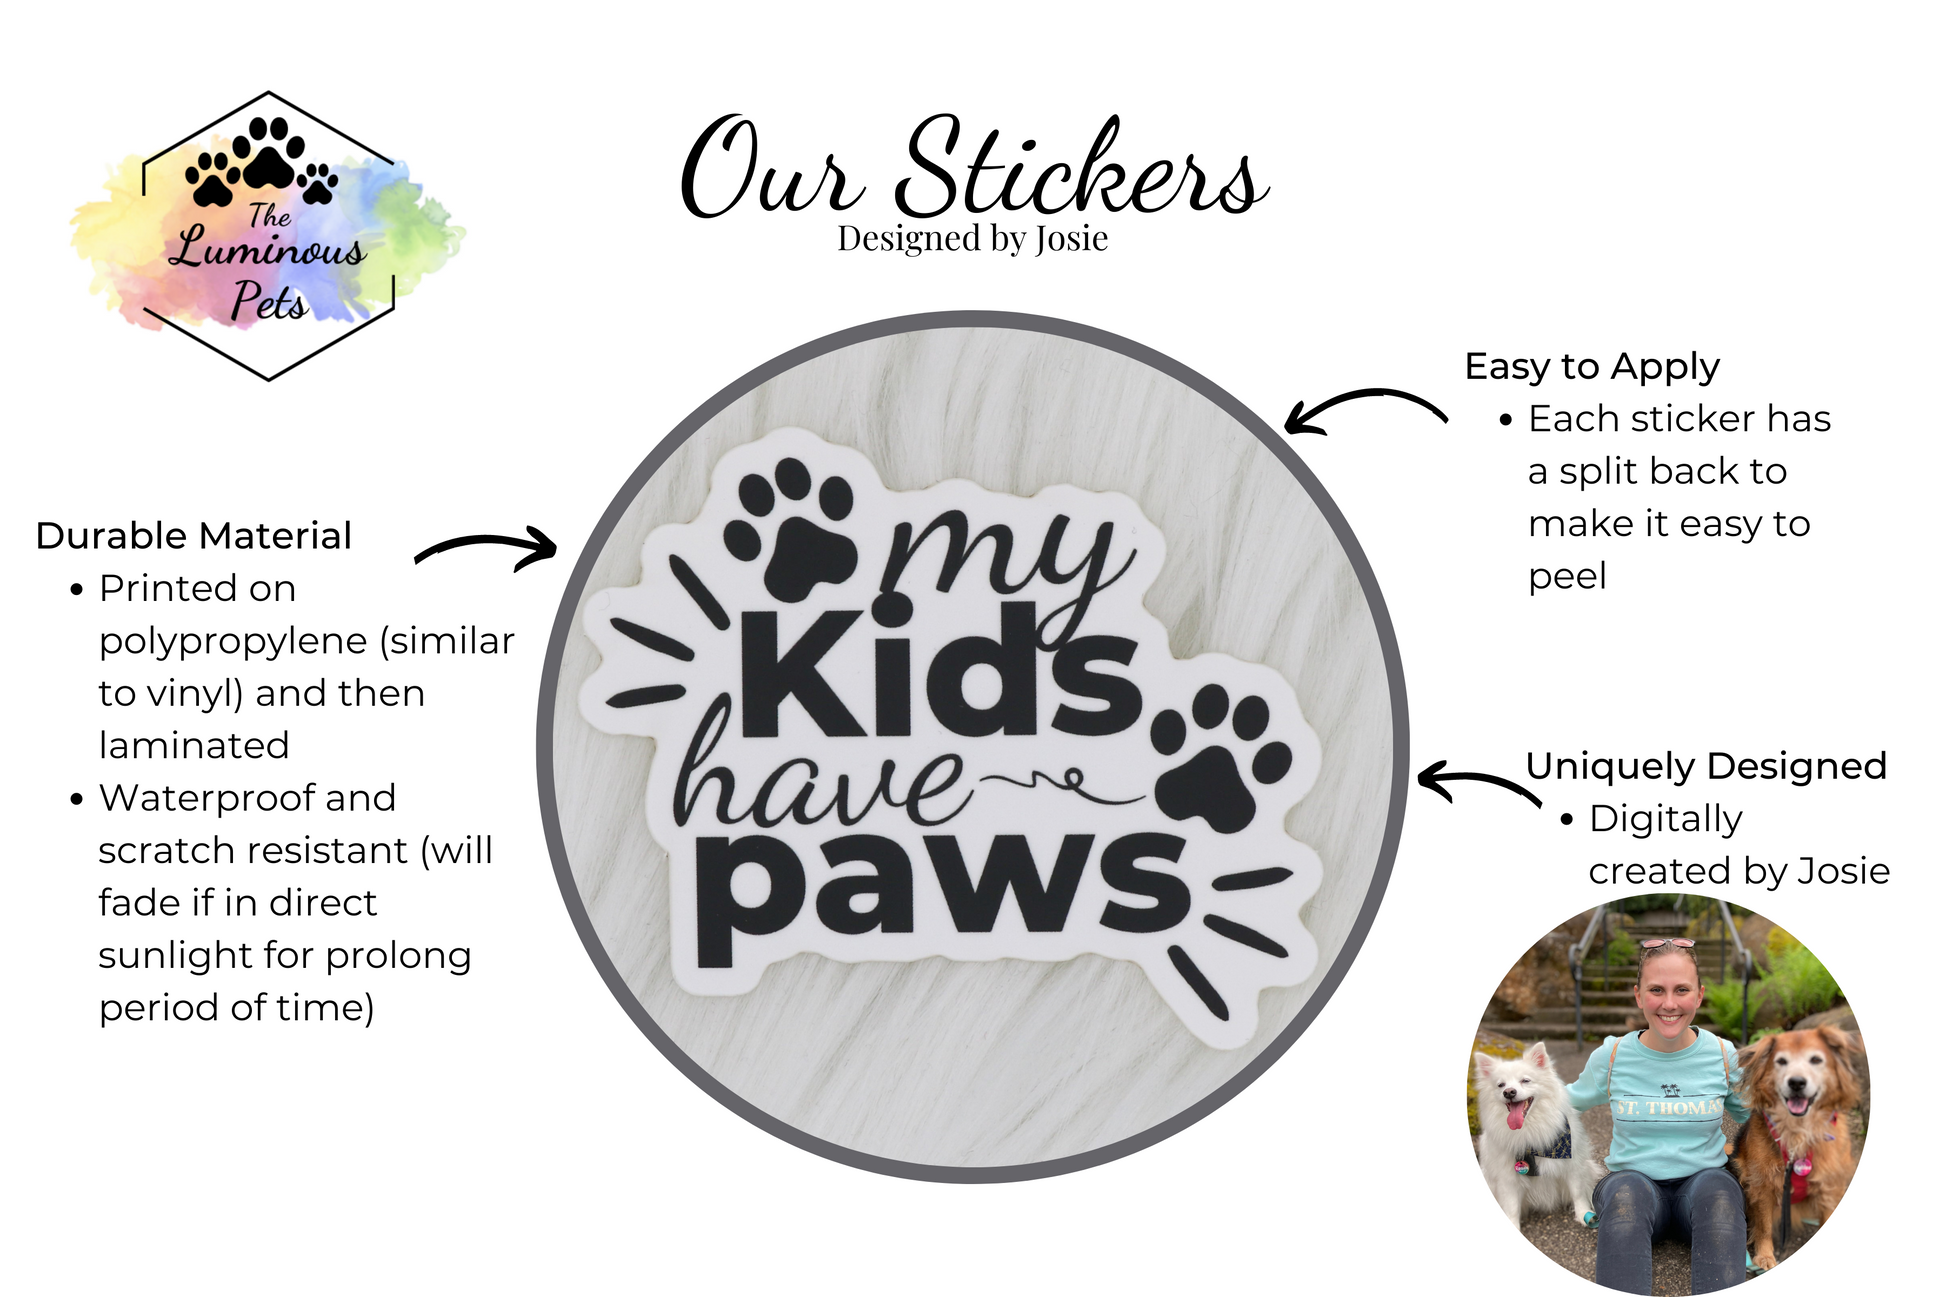 The Luminous Pets My kids have paws sticker